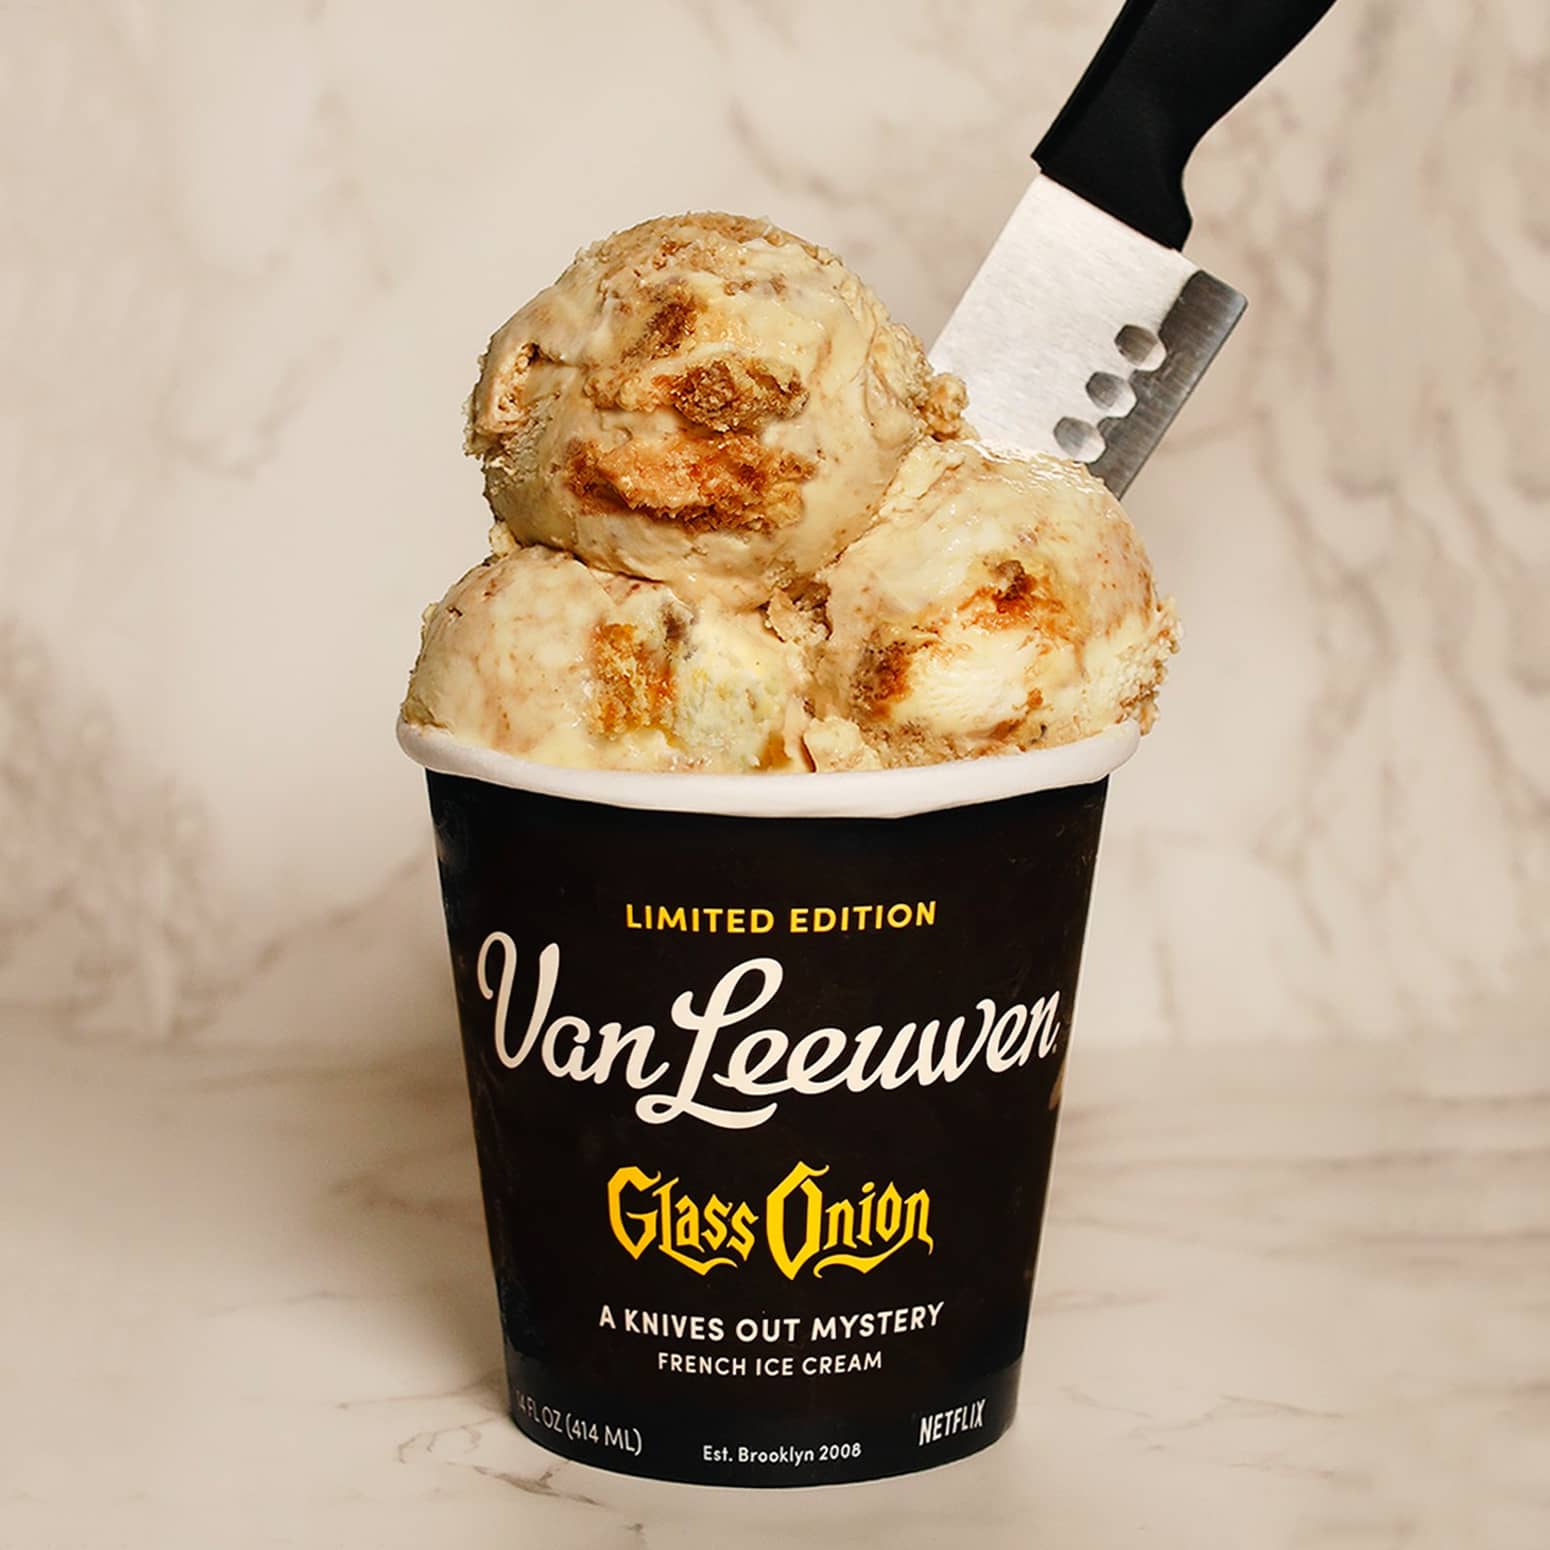 Van Leeuwen Glass Onion: A Knives Out Mystery Flavor Ice Cream